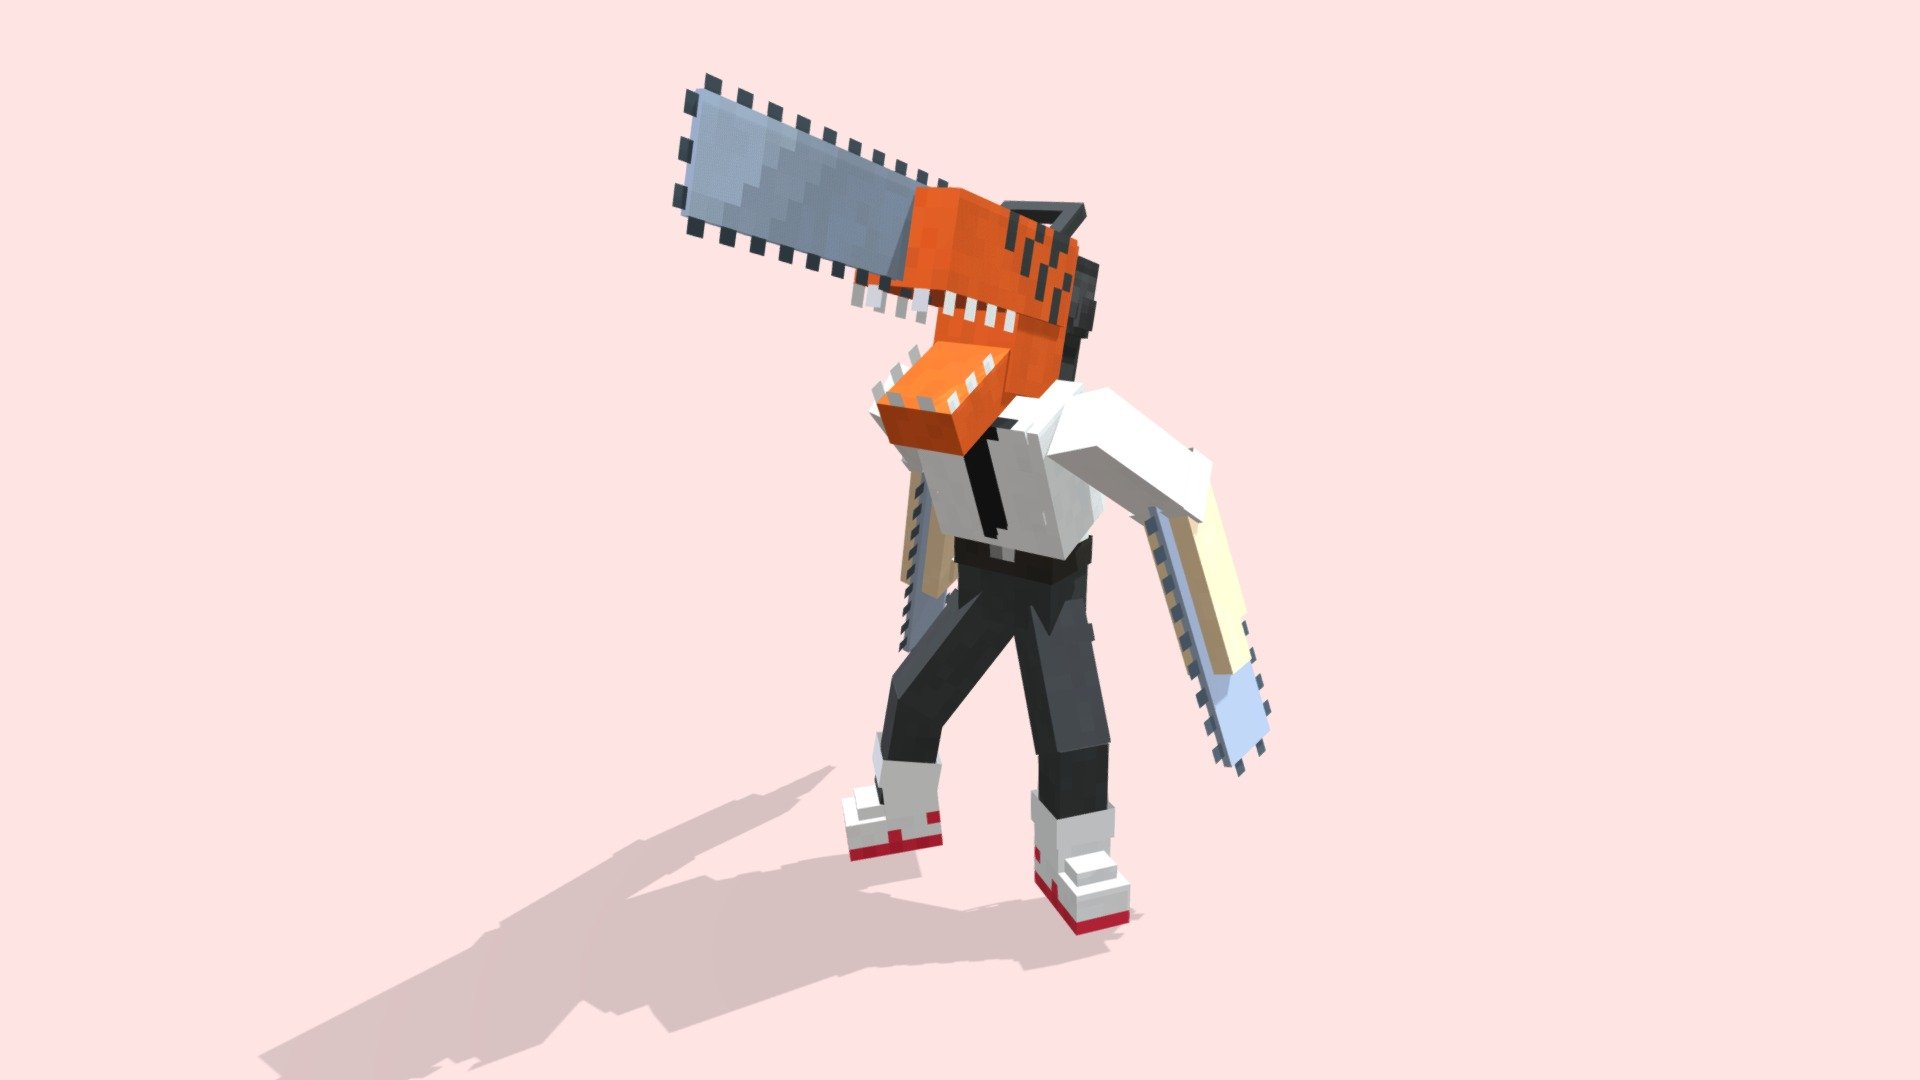 Chainsaw - Minecraft Style
update:
* Includes the blockbench project for easy implementation in minecraft mods.

Did you know&hellip;?
I make custom models for both mods and servers that use
MithycMods and Model Engine.
Write me on instagram - Chainsaw Man - Minecraft Style - 3D model by El Coleccionista (@Coleccionista) 3d model